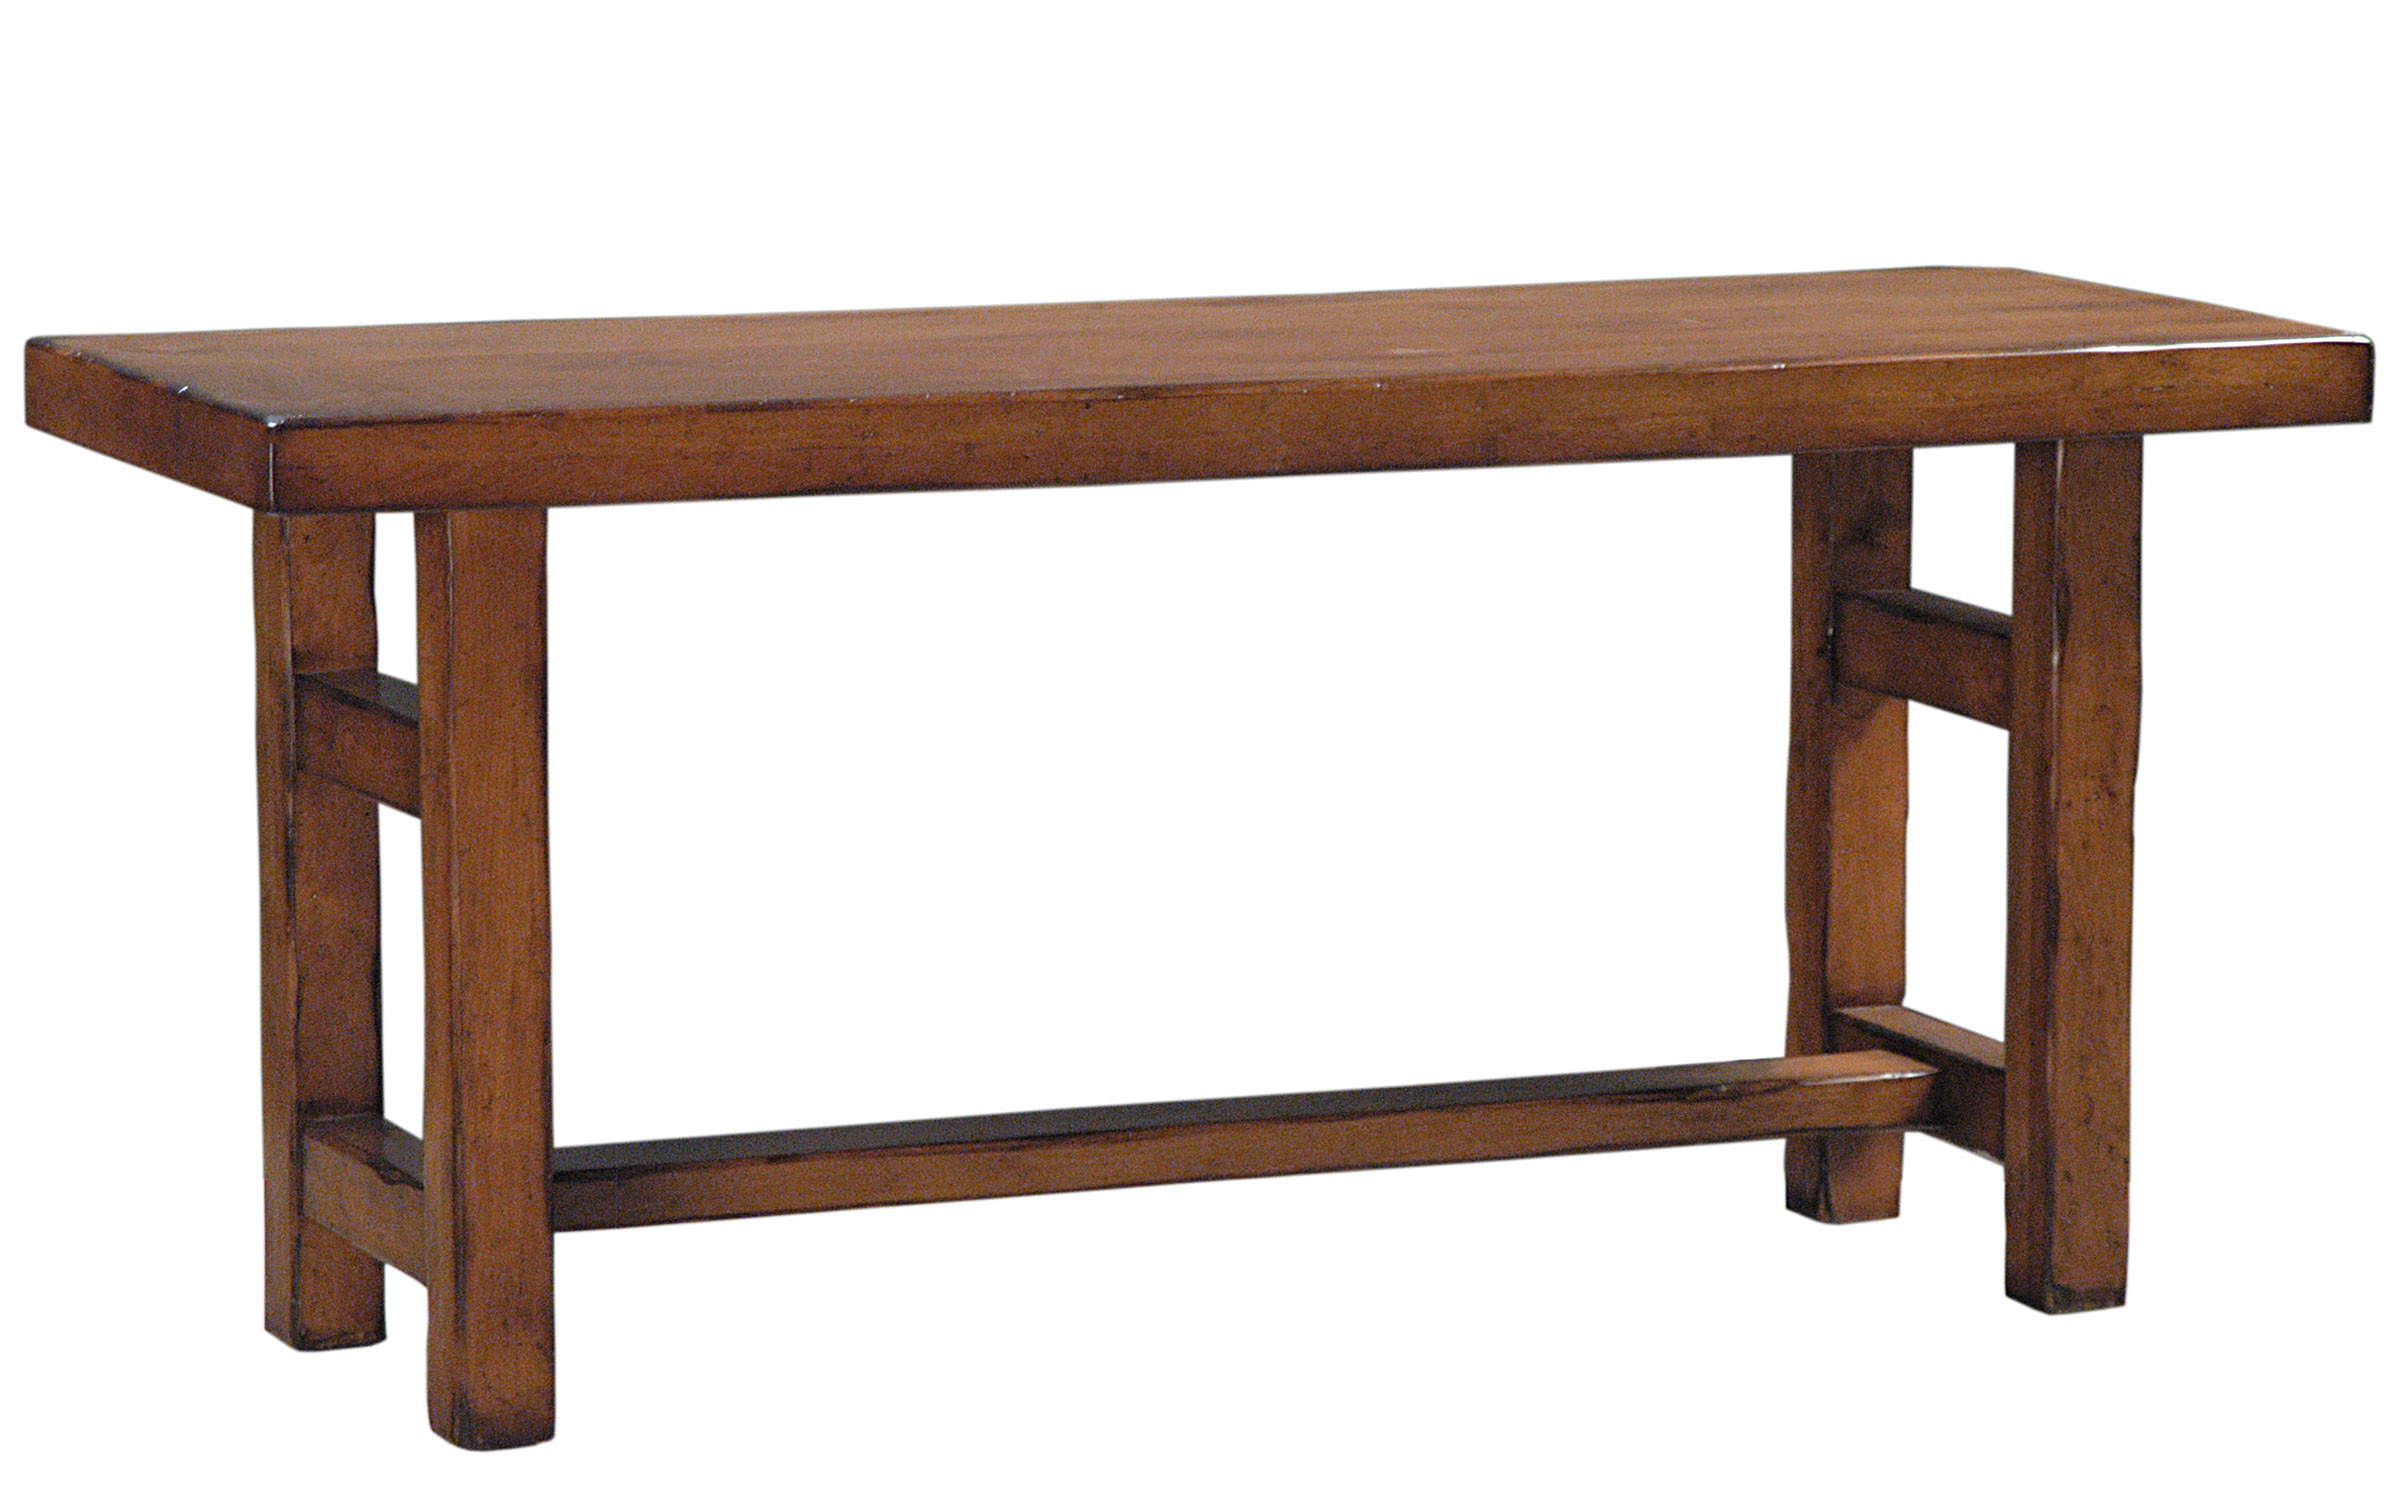 Camden modern rustic transitional sofa table console by Woodland furniture in Idaho Falls